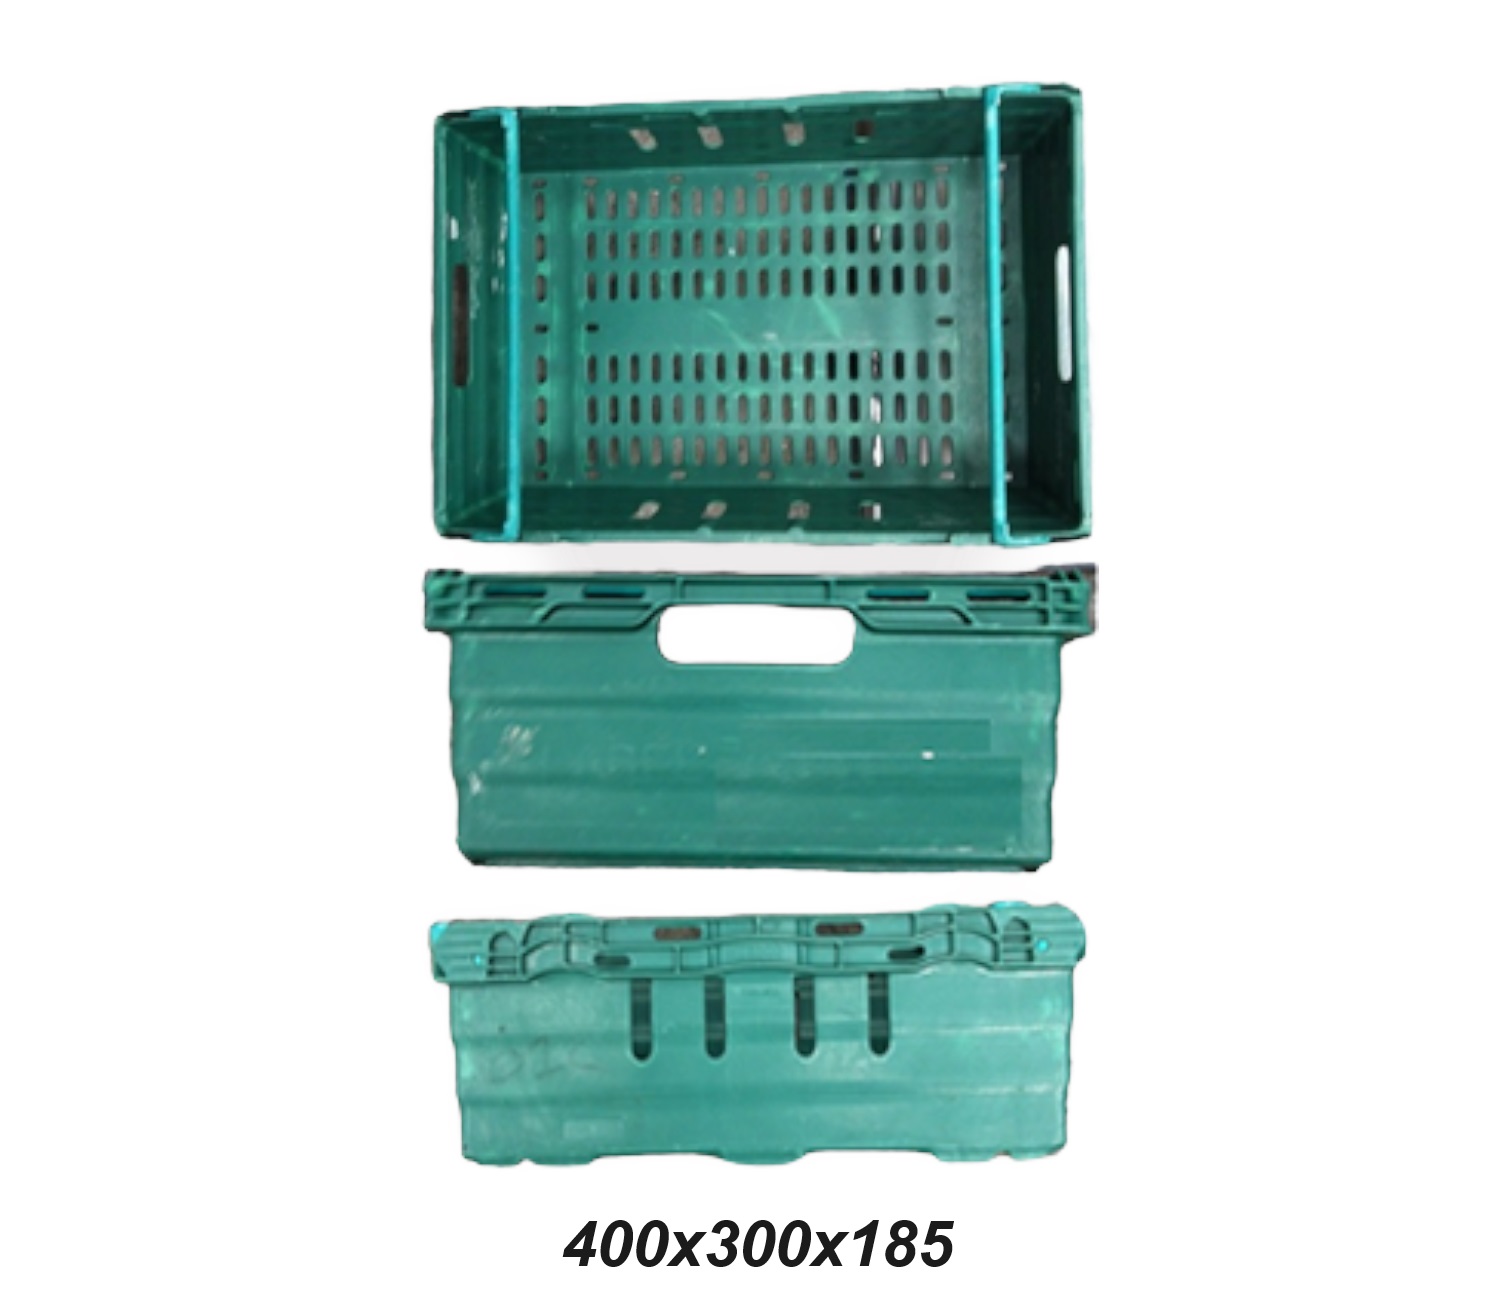 Bulk Offers Bale Arm Crate 600x400x350 Green Hybrid Packs of 4 - Solid Base